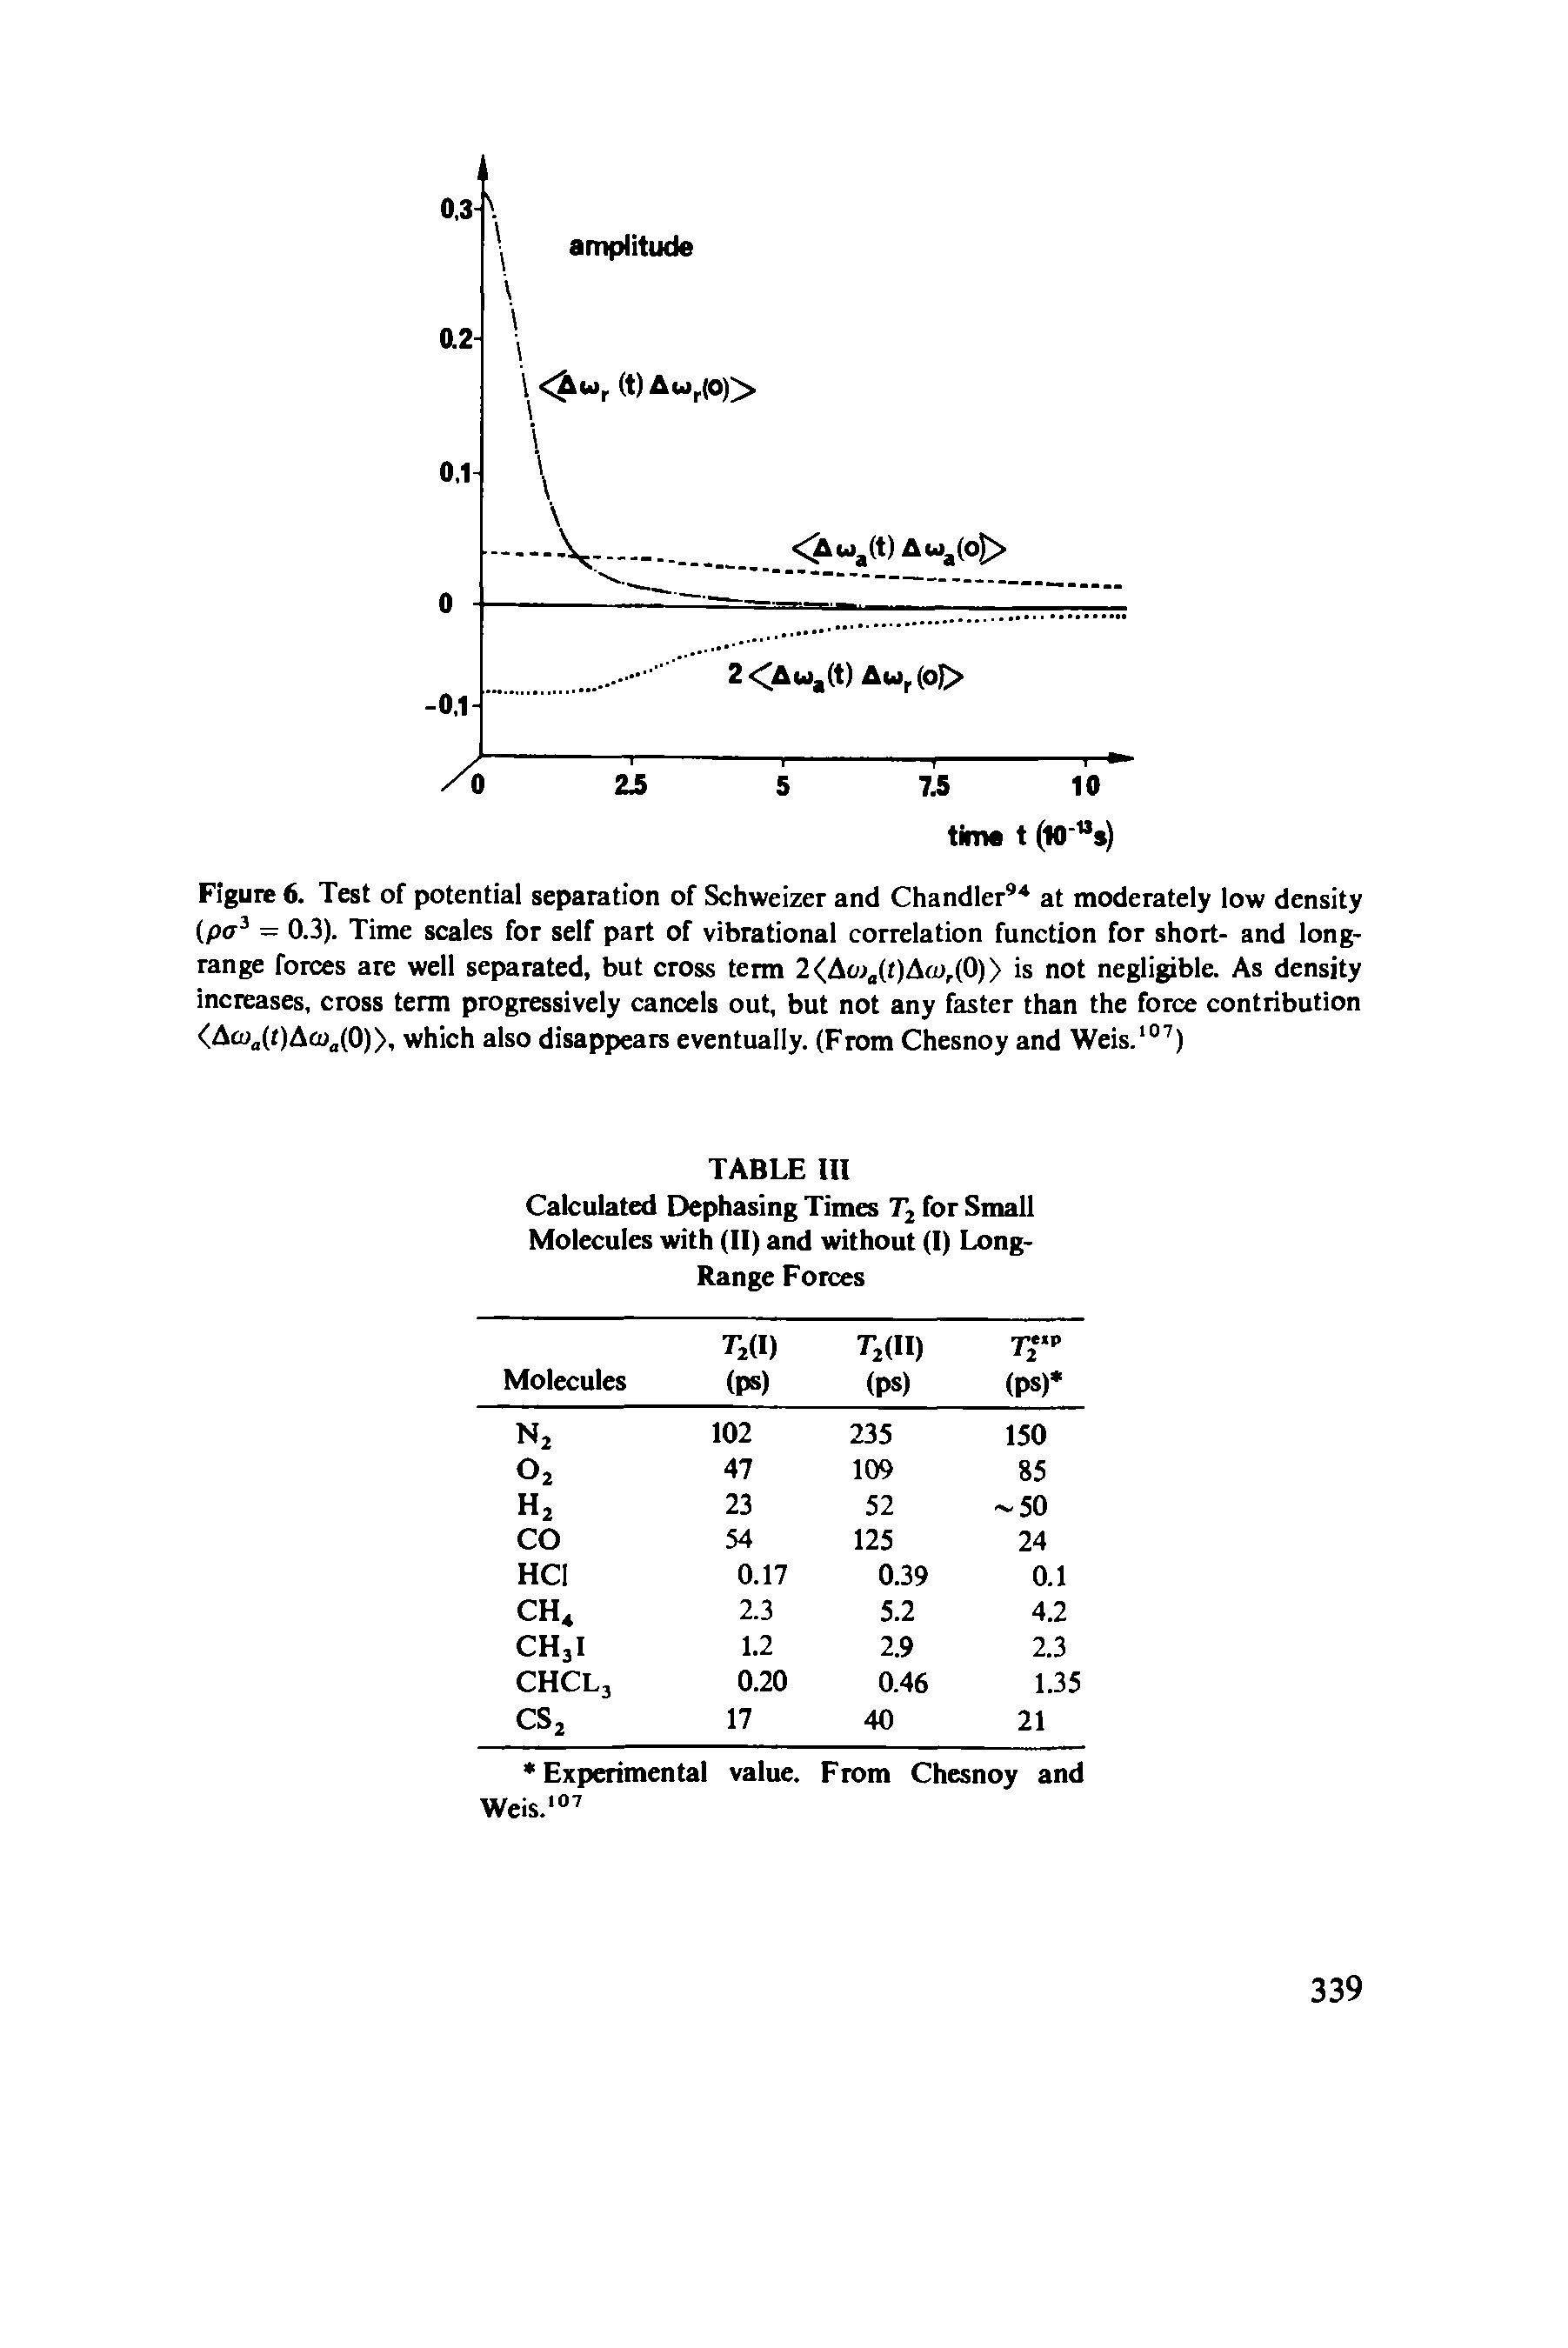 Figure 6. Test of potentiai separation of Schweizer and Chandier at moderateiy low density (pa = 0.3). Time scales for self part of vibrational correlation function for short- and long-range forces are well separated, but cross term 2<Aw (t)Aru,(0)> is not negligible. As density increases, cross term progressively cancels out, but not any faster than the force contribution <Aco (r)Acu (0)>, which also disappears eventually. (From Chesnoy and Weis. ° )...